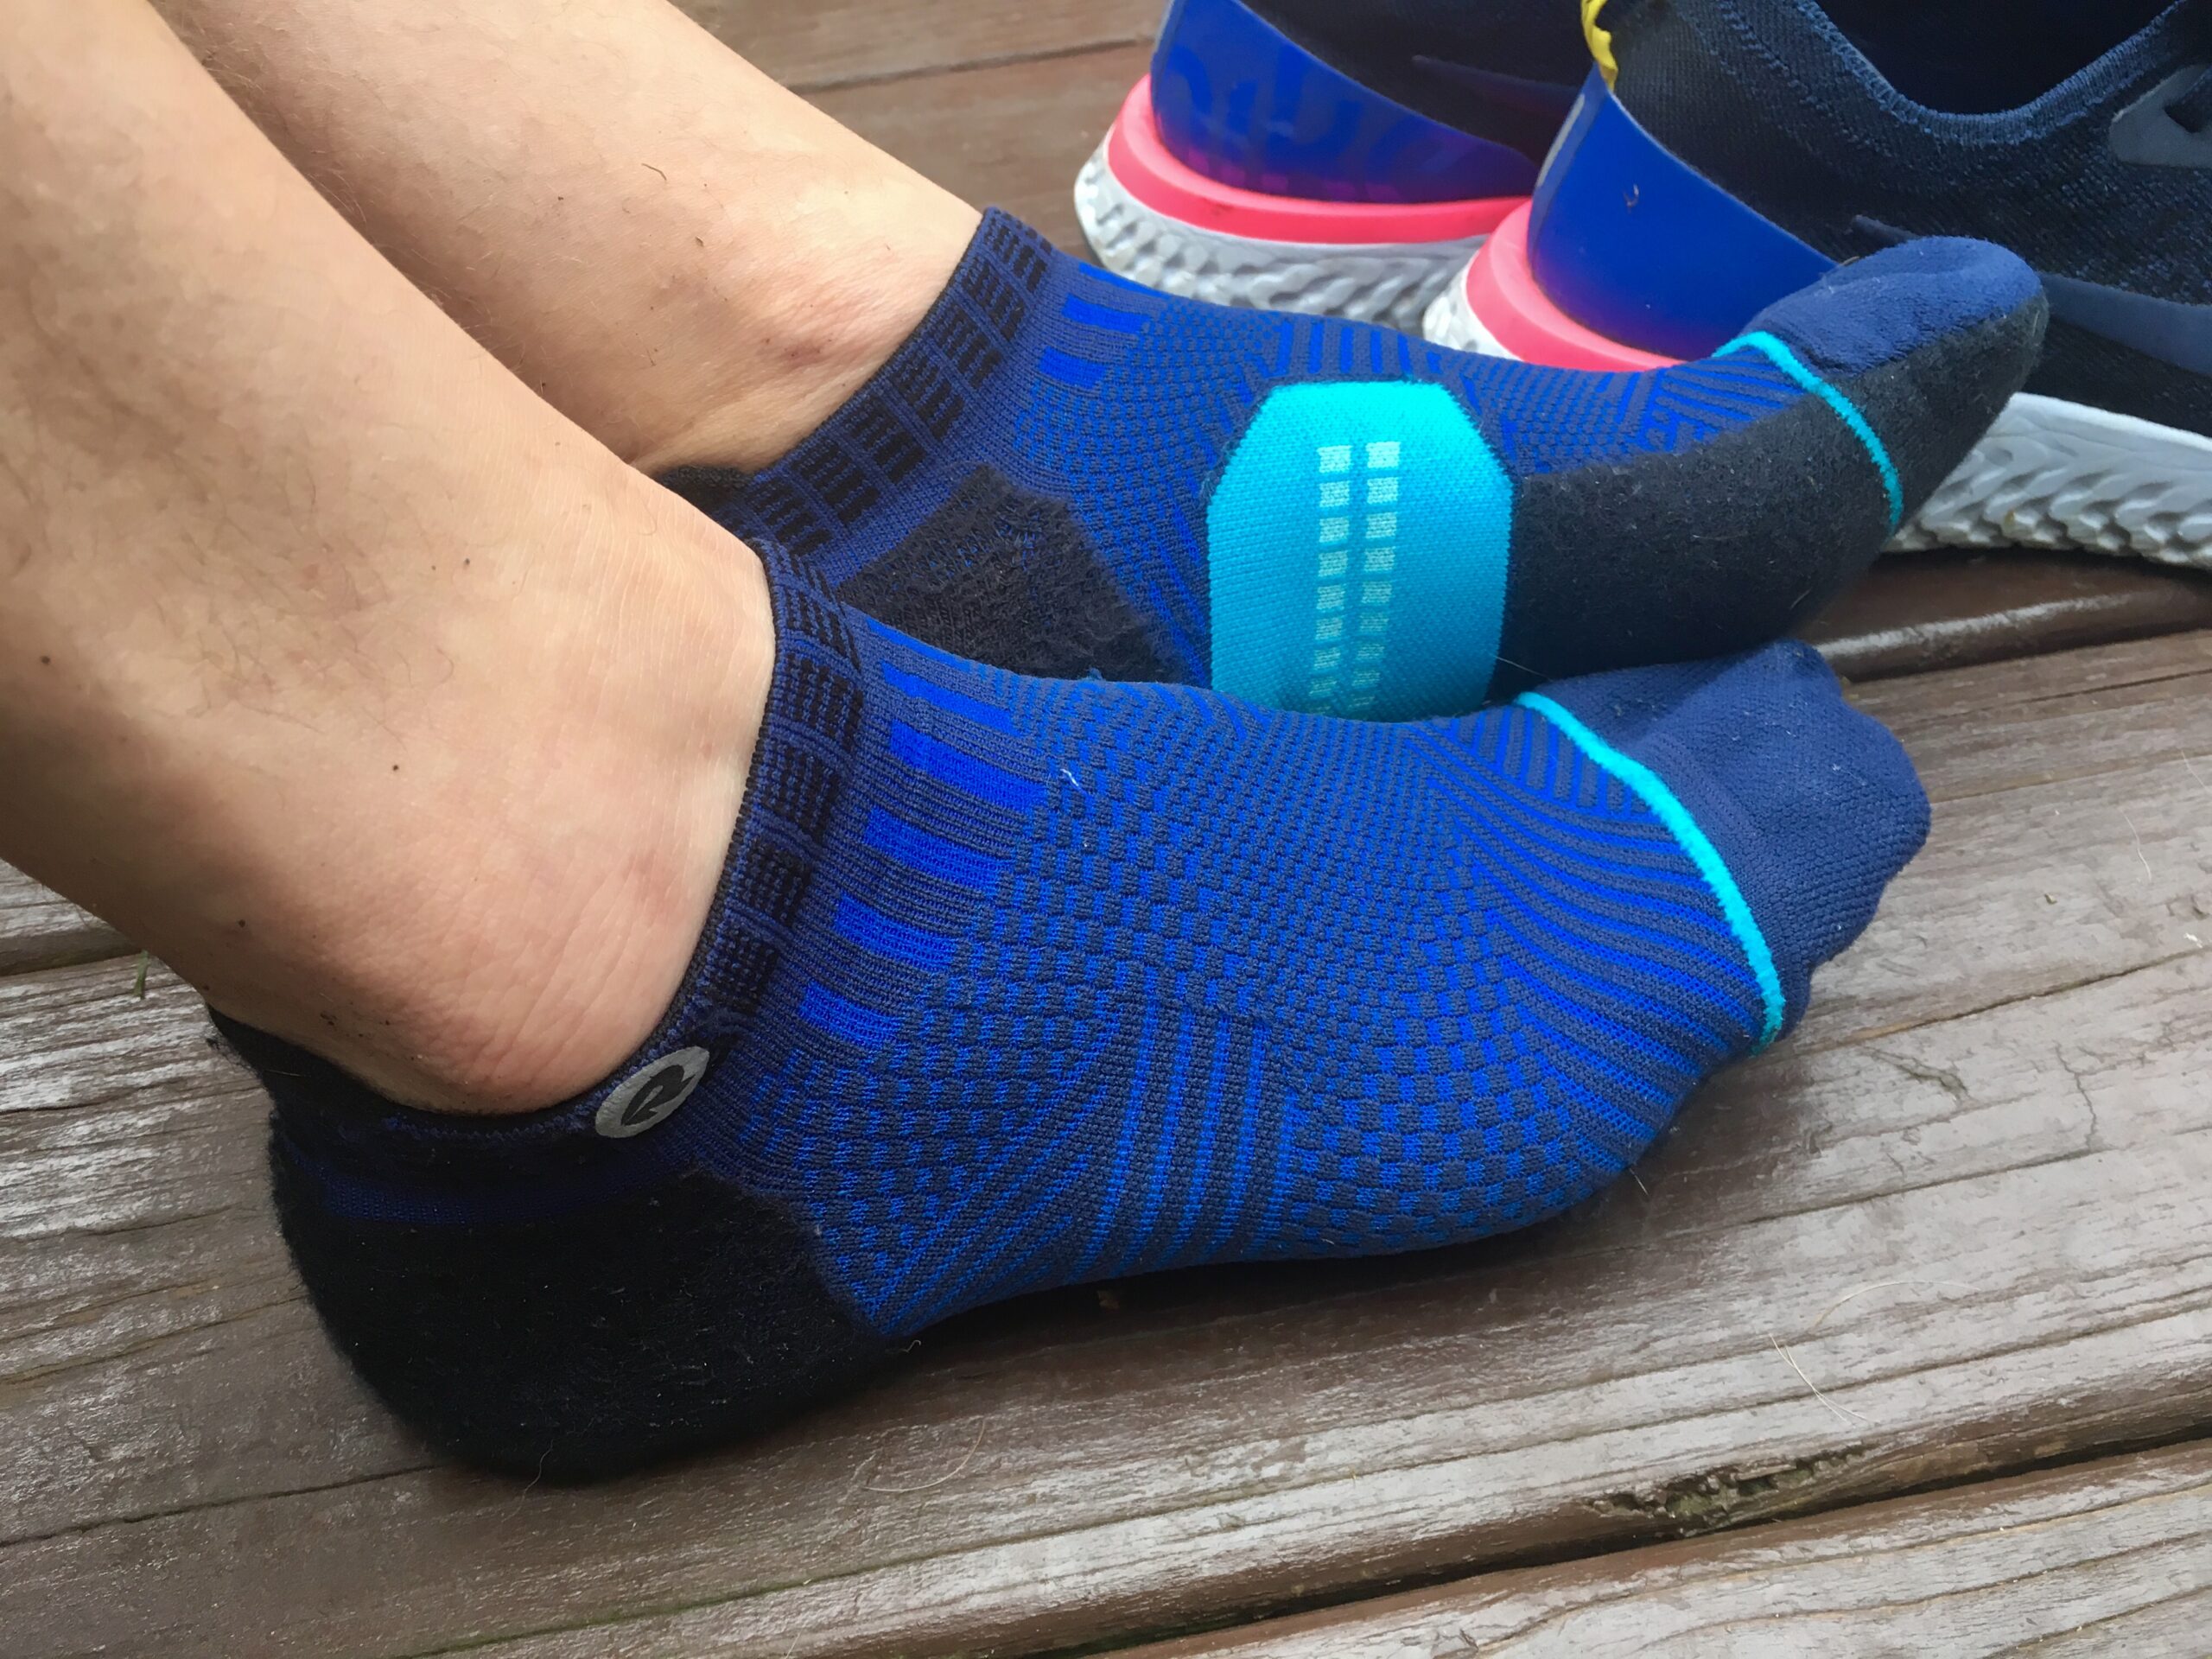 Rockay Accelerate Socks Performance Review - Believe in the Run